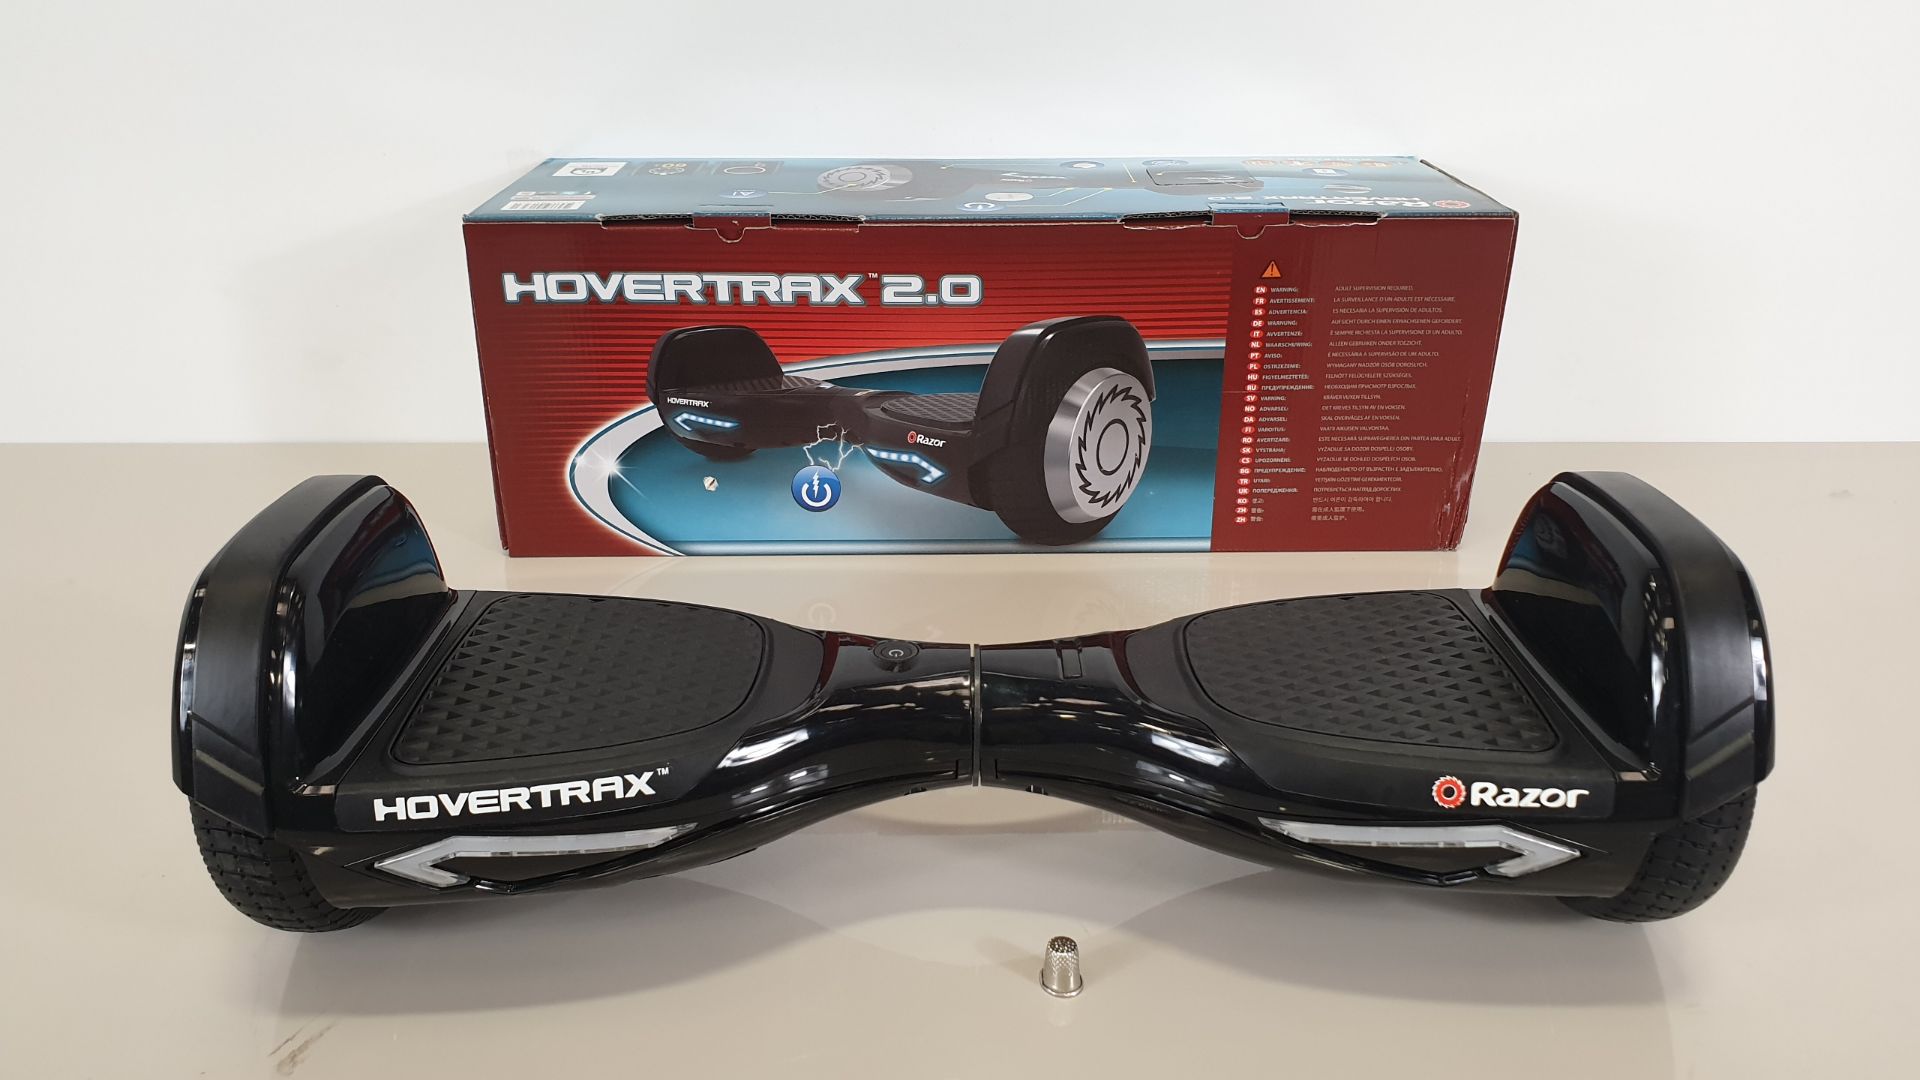 (LOT FOR THURSDAY 28TH MAY AUCTION) BRAND NEW BOXED RAZOR HOVERTRAX 2.0 ONYX BLACK 9KMH (PLEASE NOTE